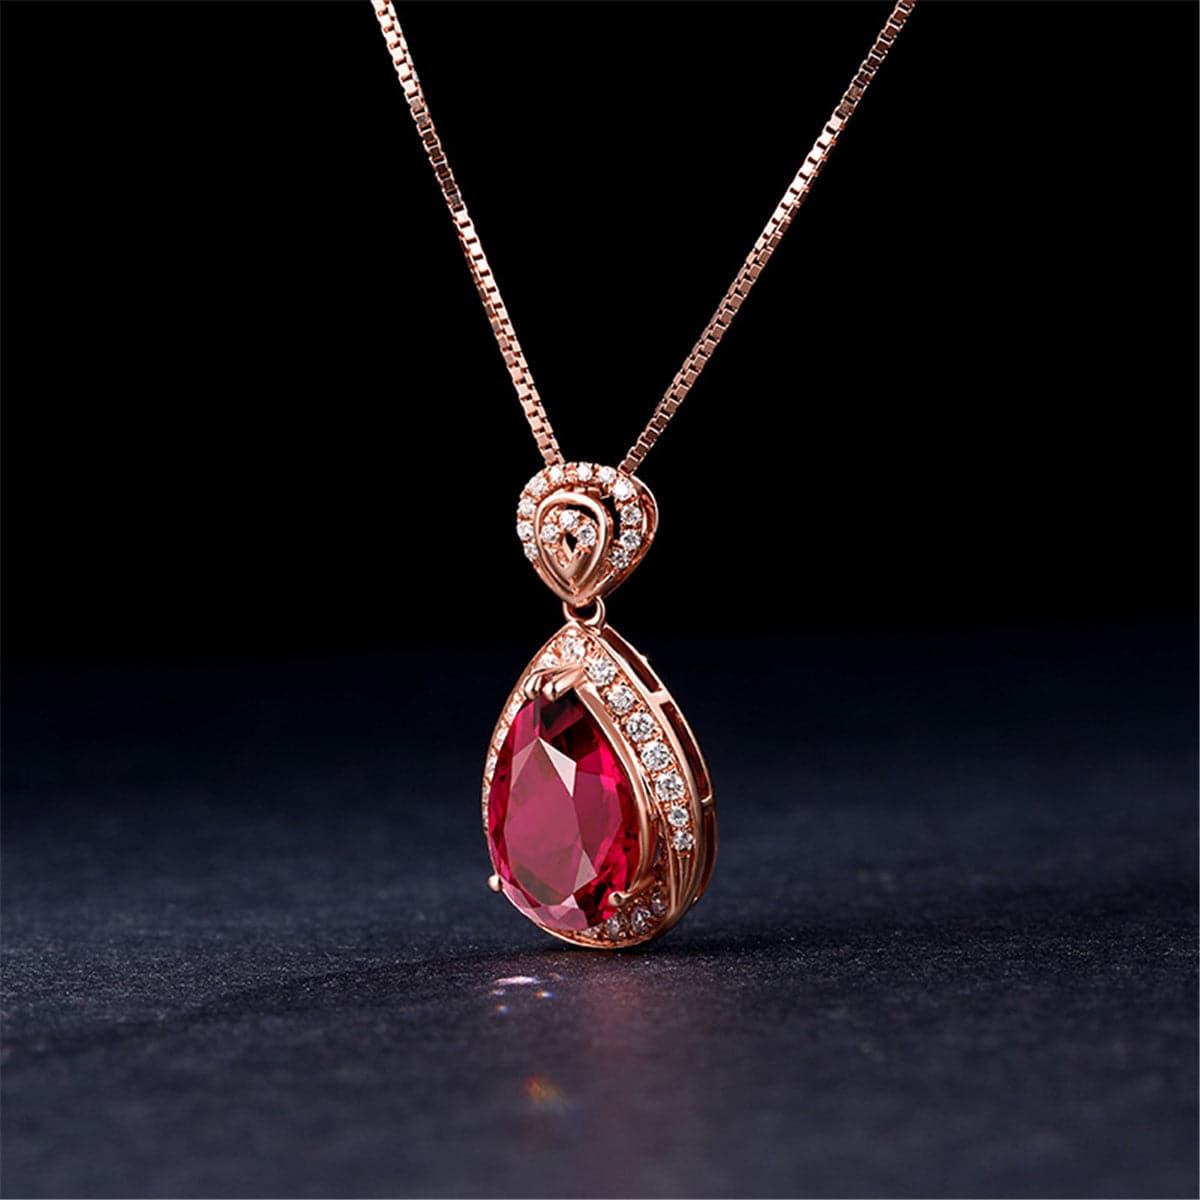 Red Crystal & Cubic Zirconia 18K Rose Gold-Plated Pear-Cut Halo Pendant Necklace